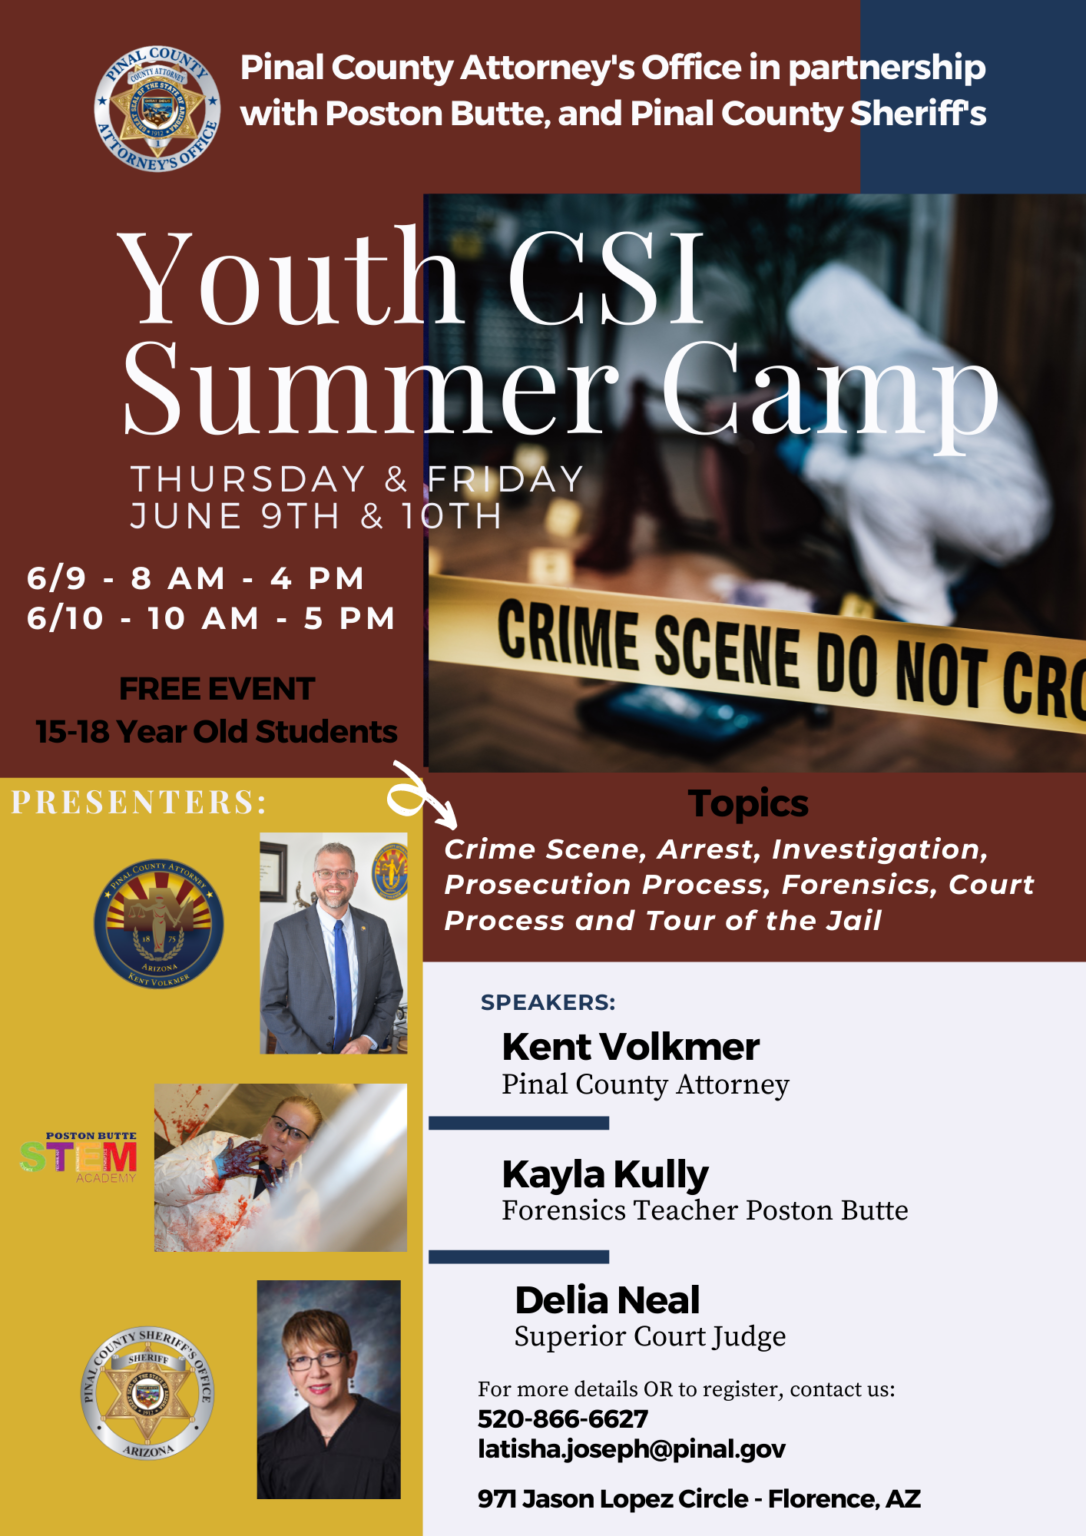 Youth CSI Summer Camp set for June Pinal County Attorney's Office